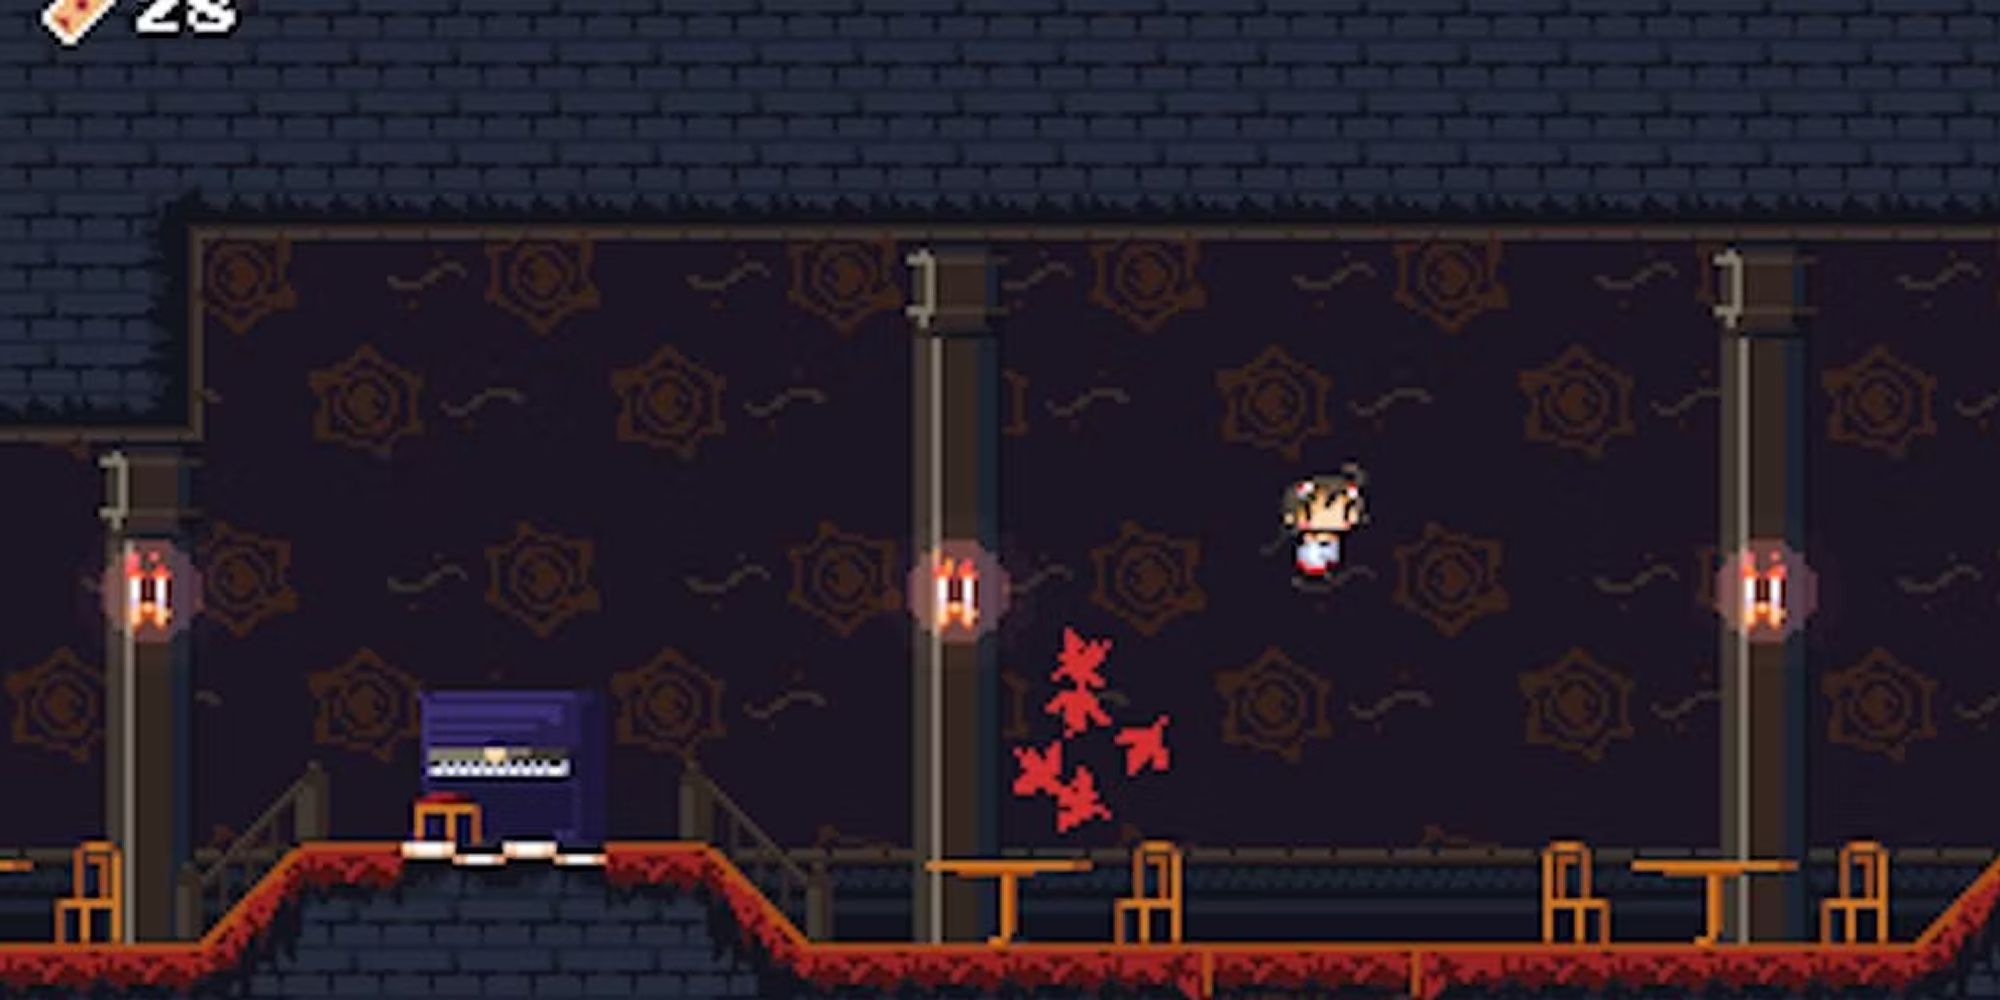 Momodora 1 and 2 Chmaber With A Piano, Tables, Chairs, And Leaves